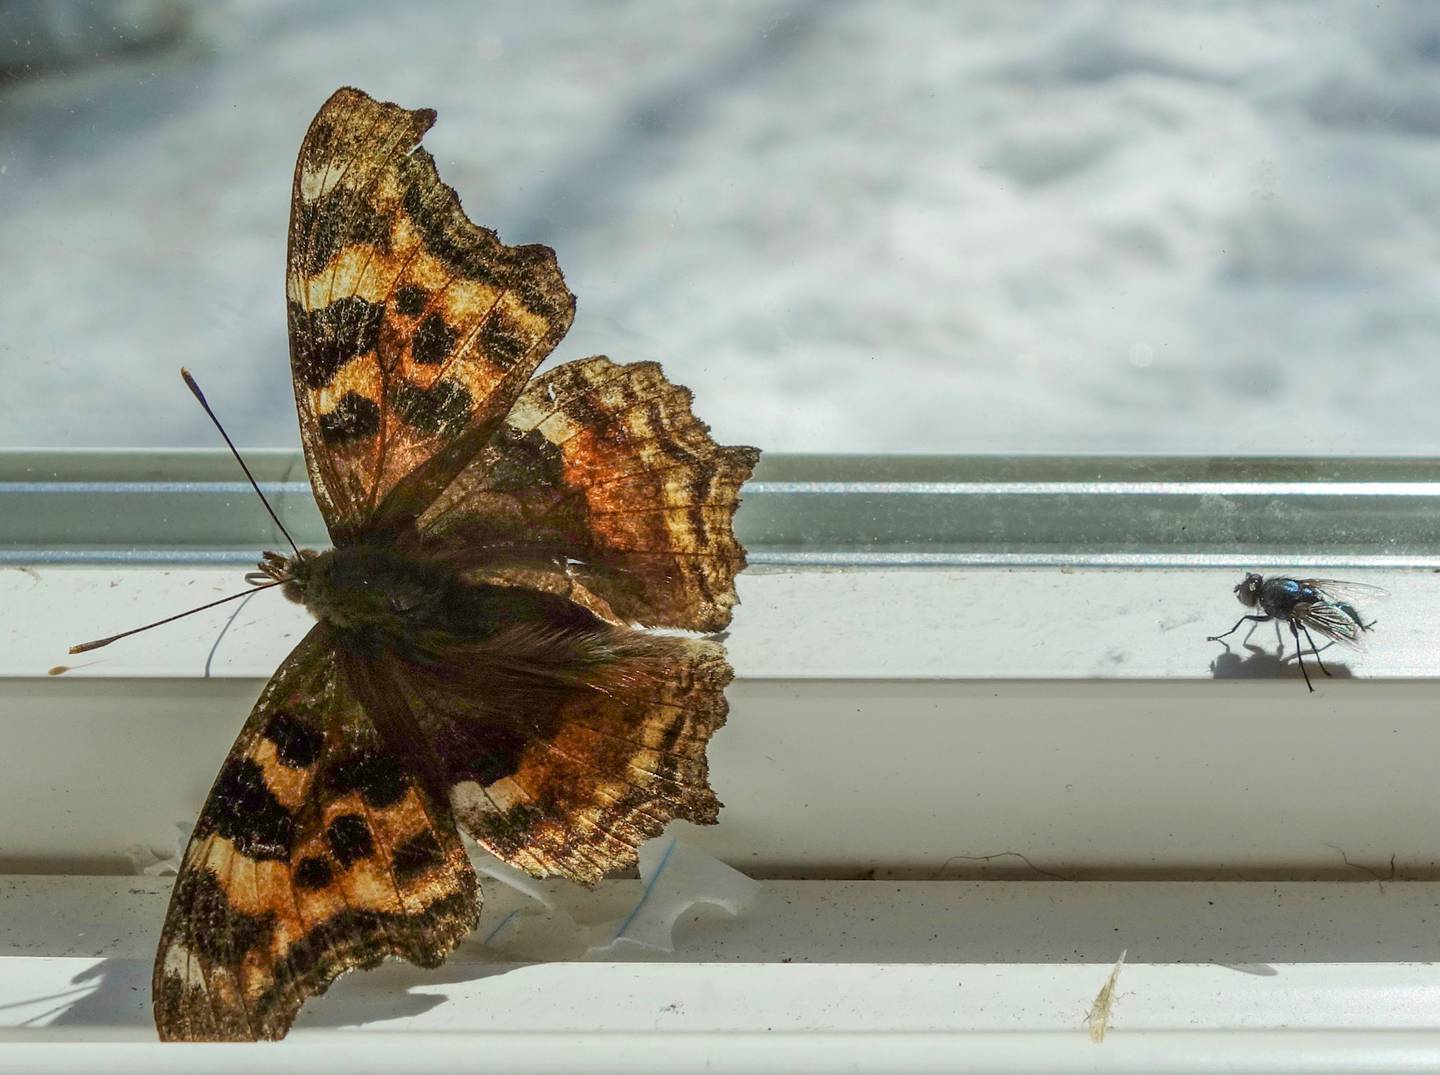 A Compton tortoiseshell butterfly emerges from winter hibernation